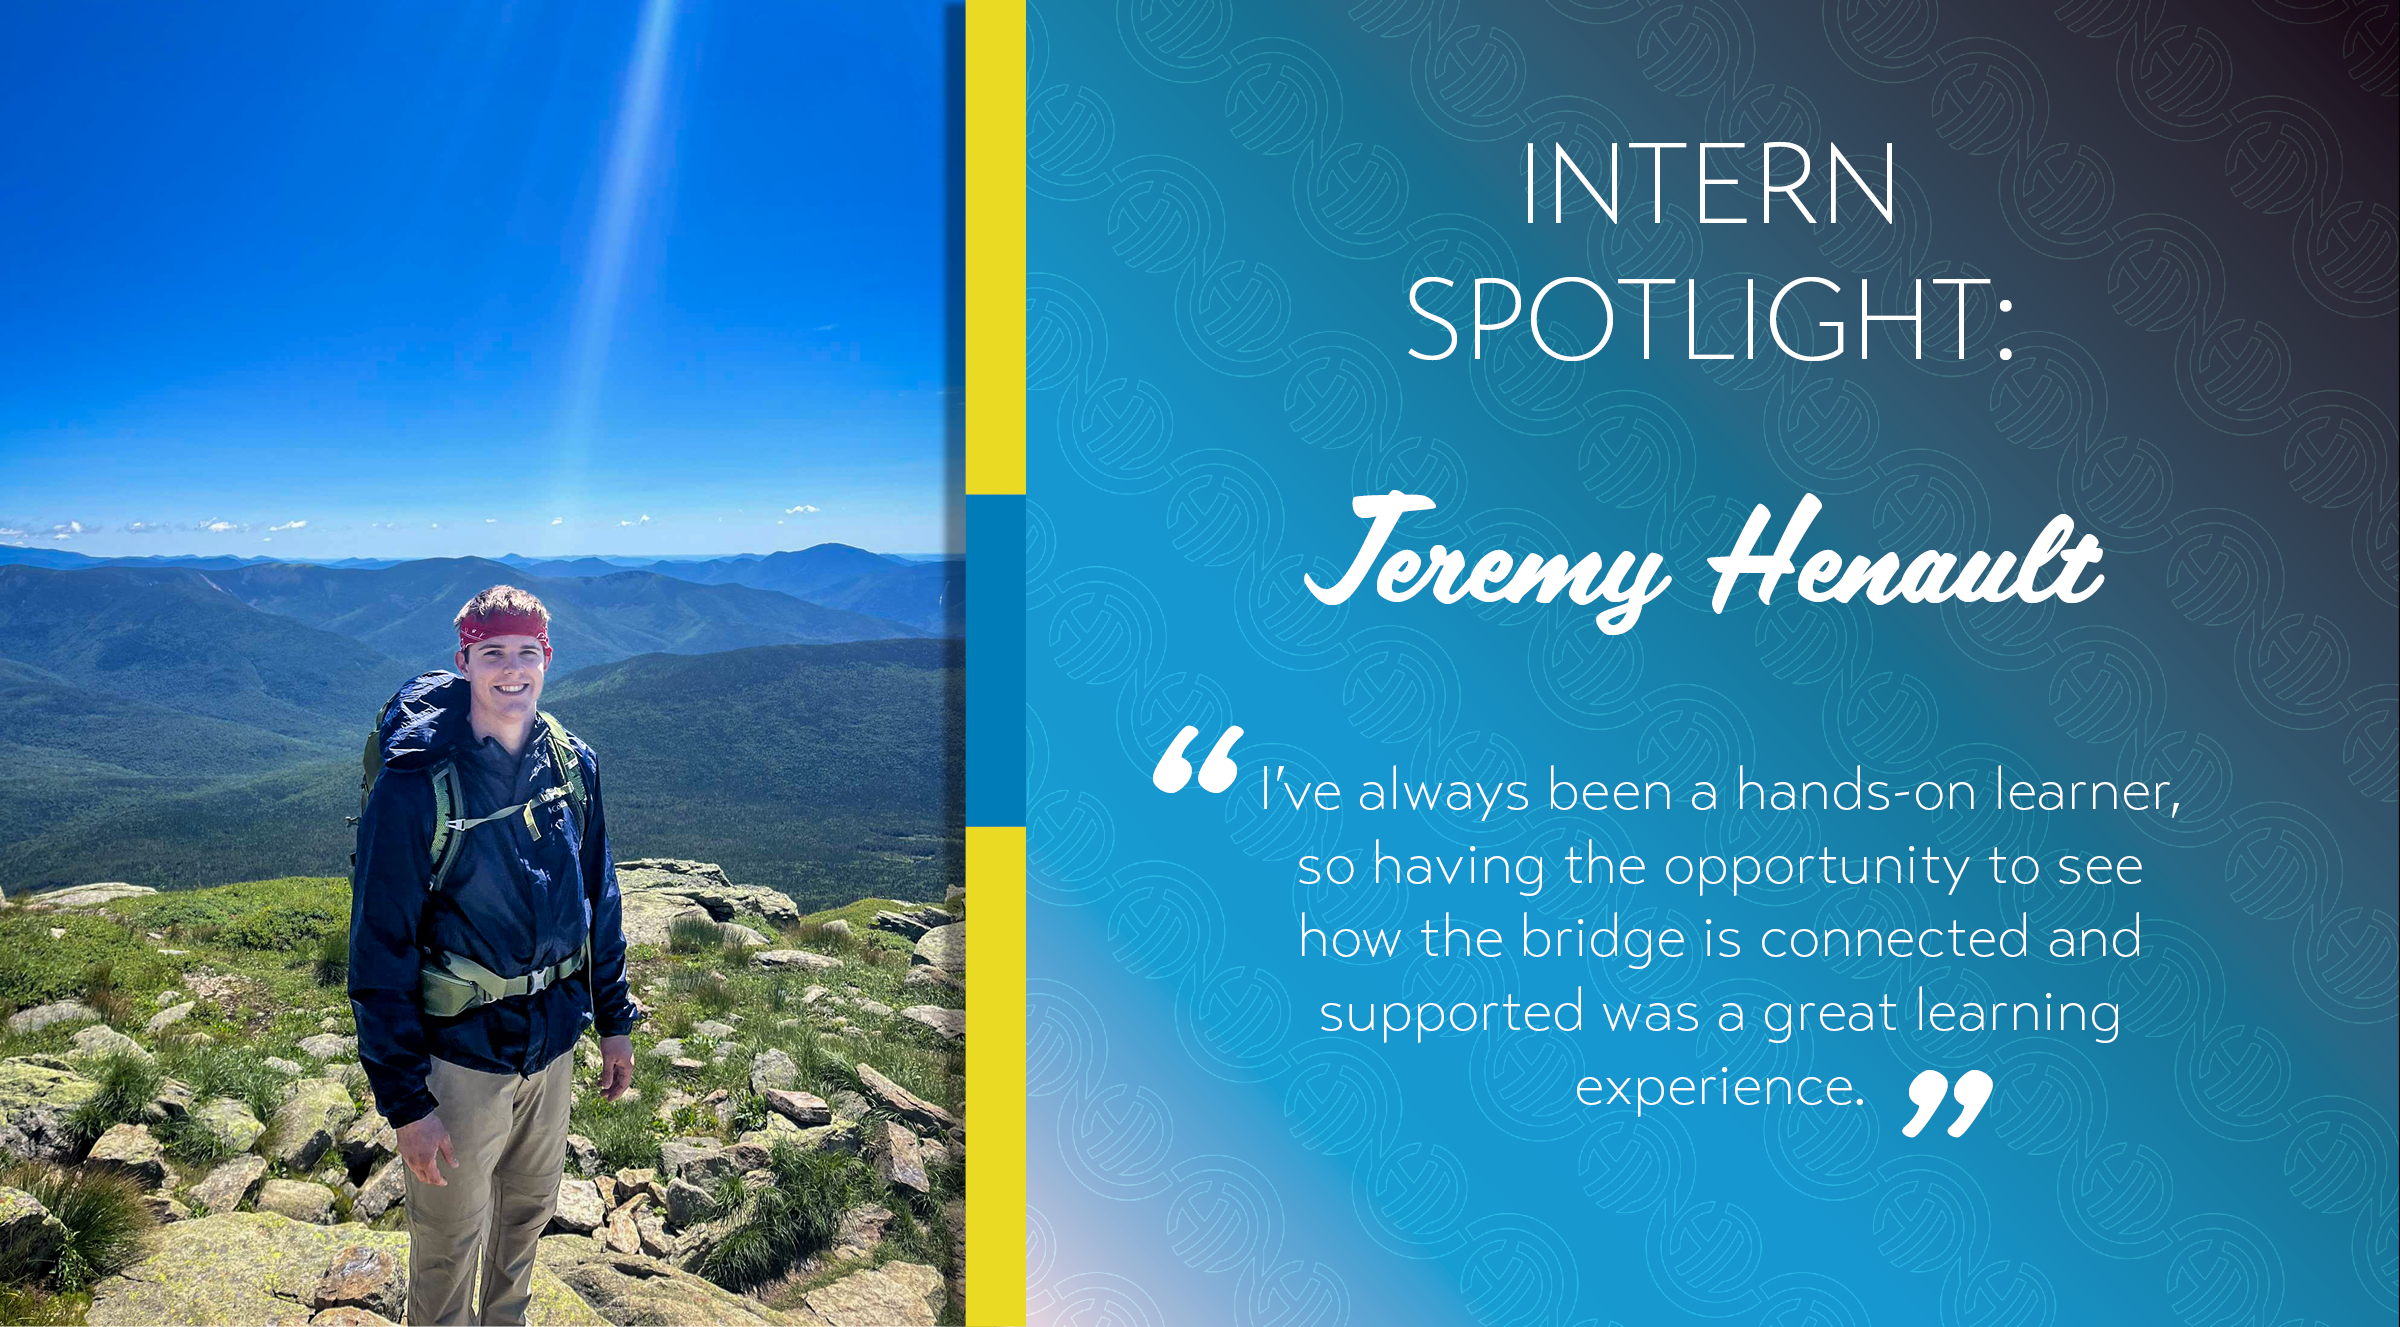 A photo of Jeremy Henault at the top of a mountain next to the sidebar text that says "Intern Spotlight" and has a quote included from his responses.